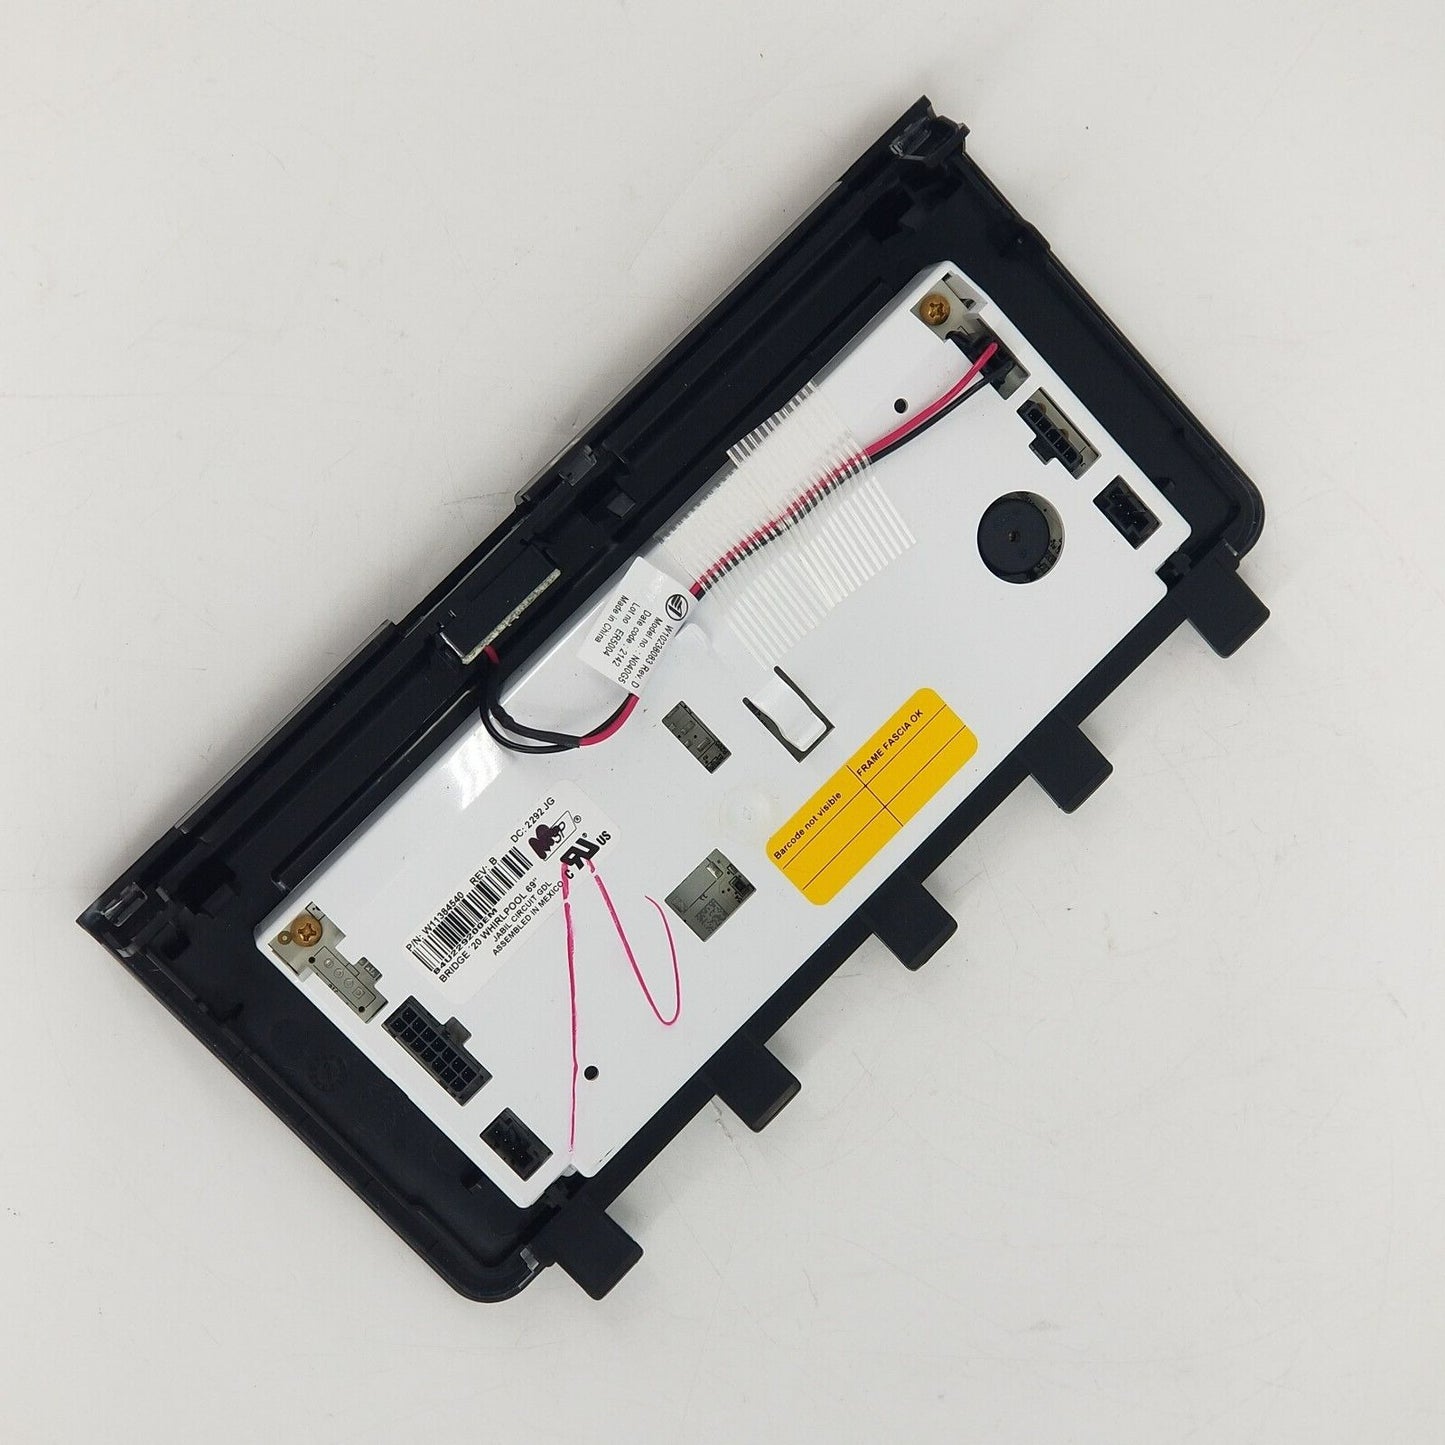 OEM Replacement for Whirlpool Refrigerator Control W11384540